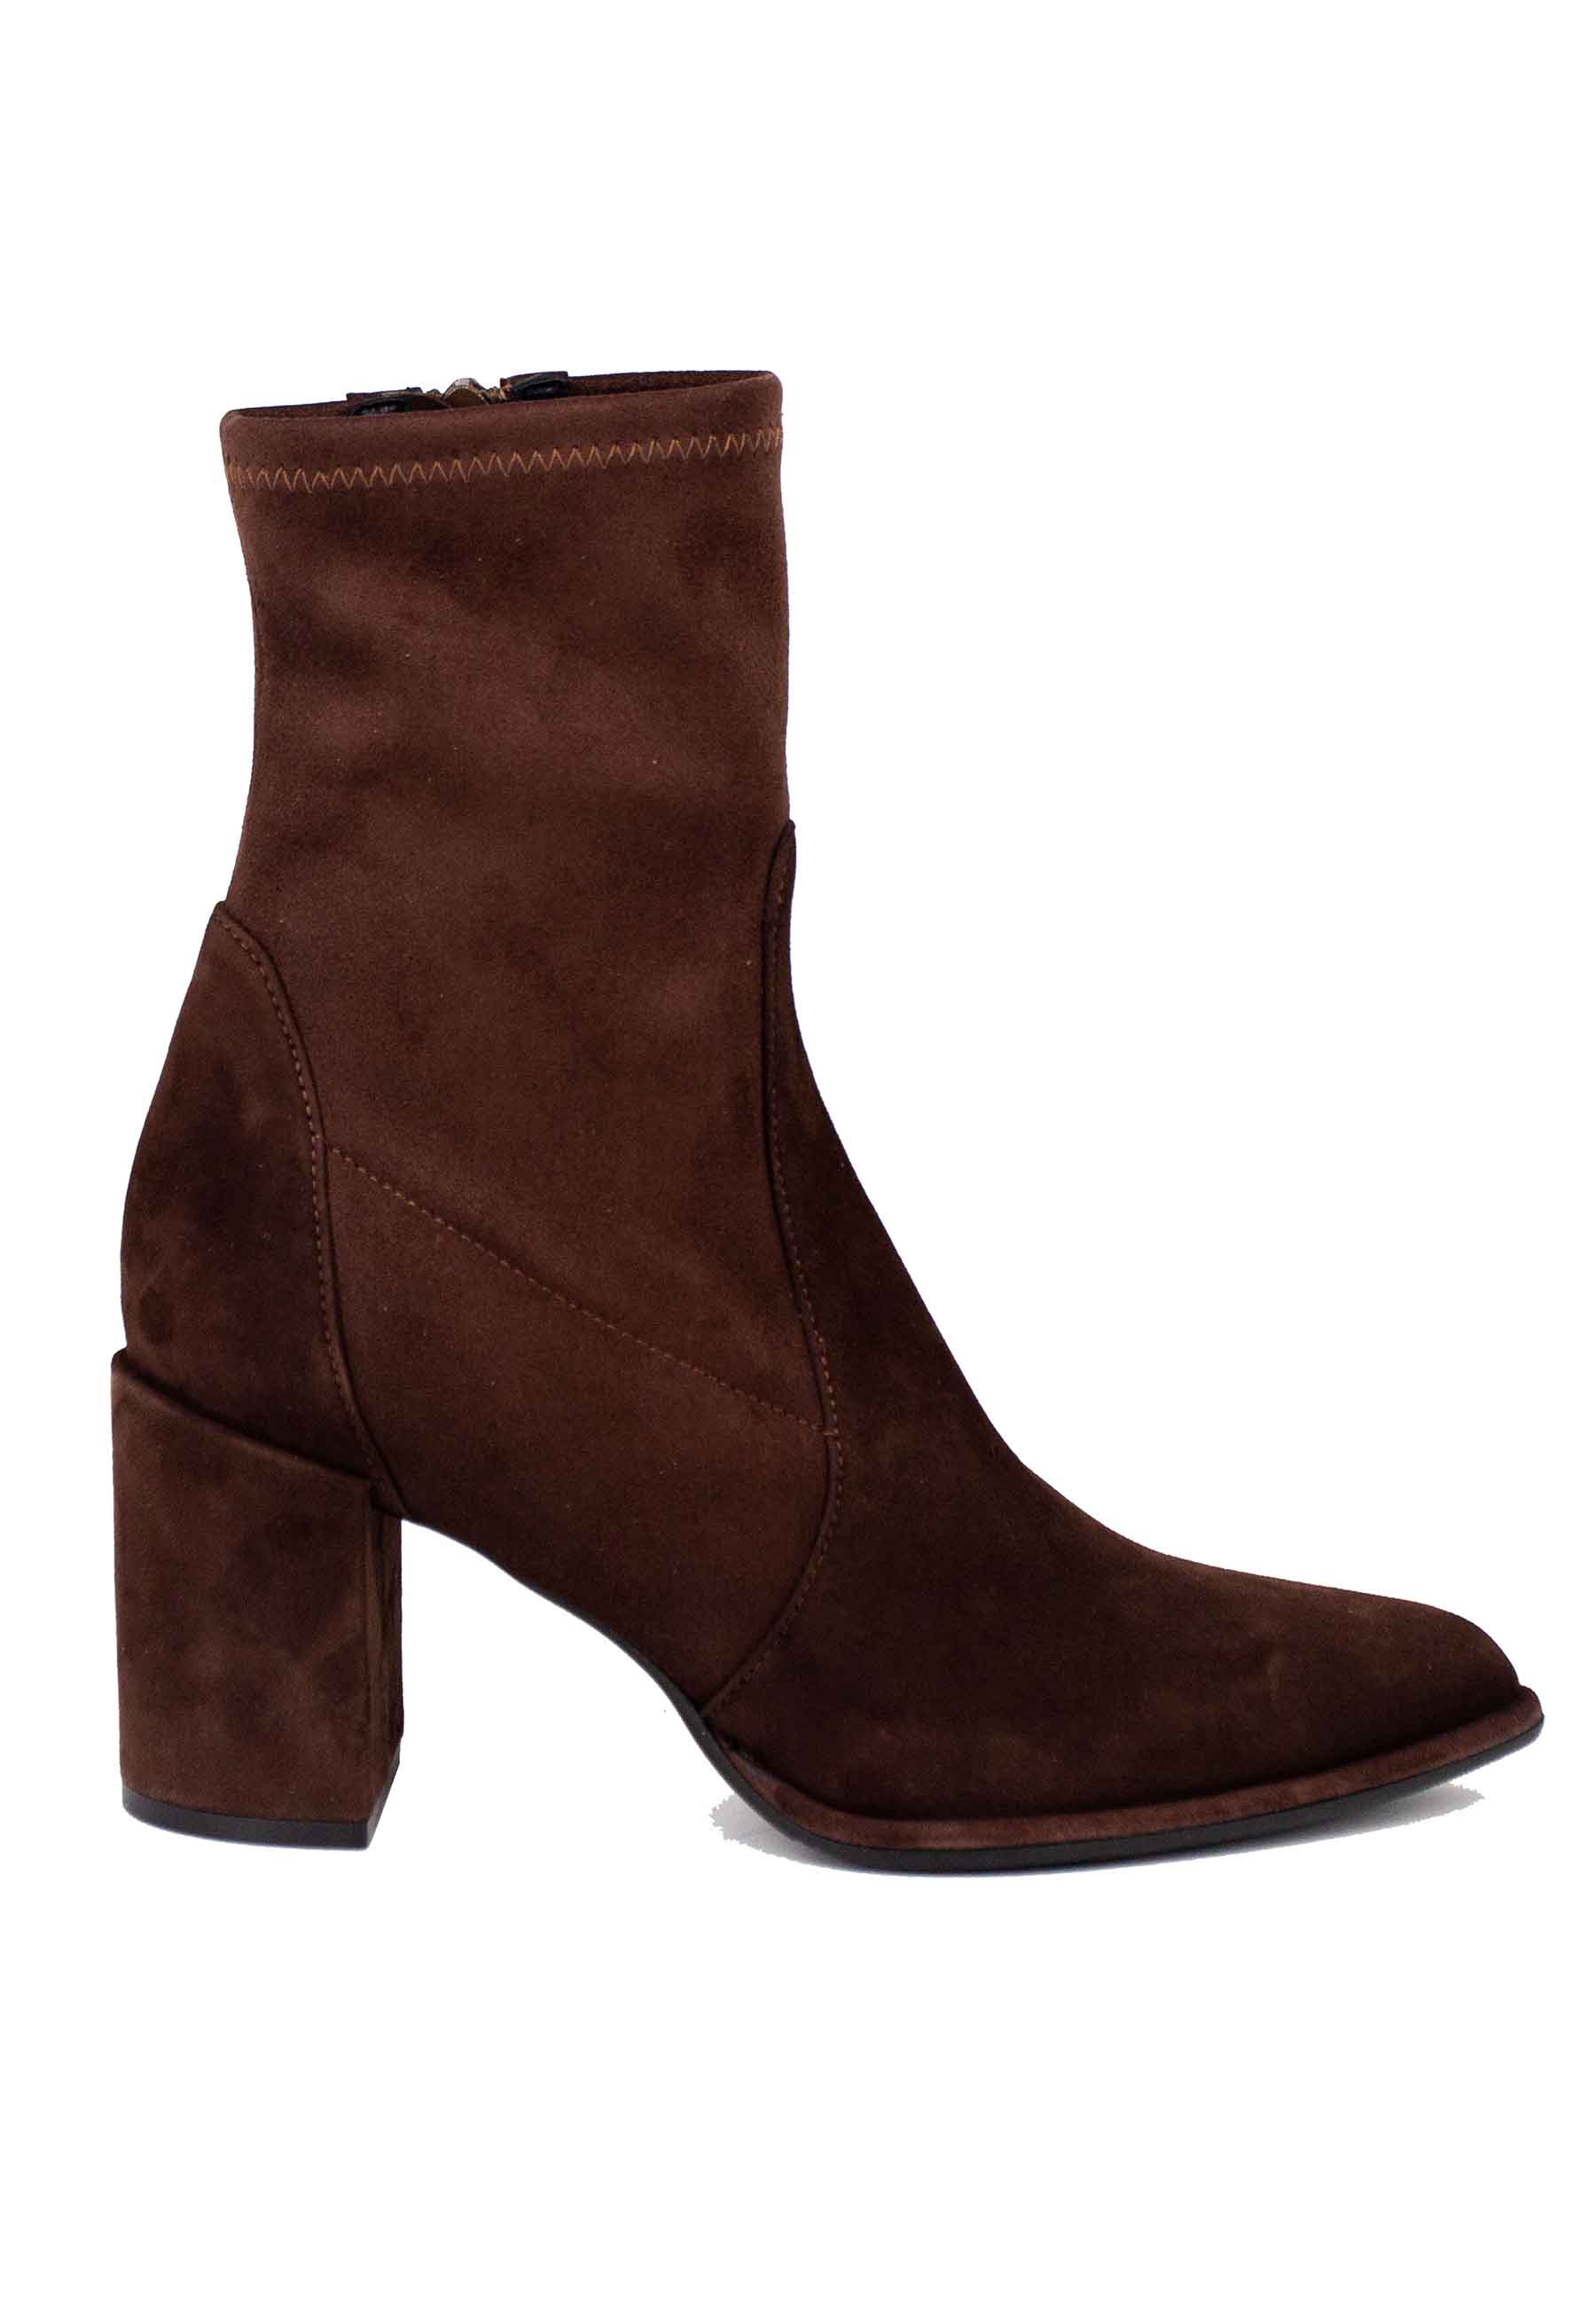 Women's brown suede pointed toe high heel ankle boots